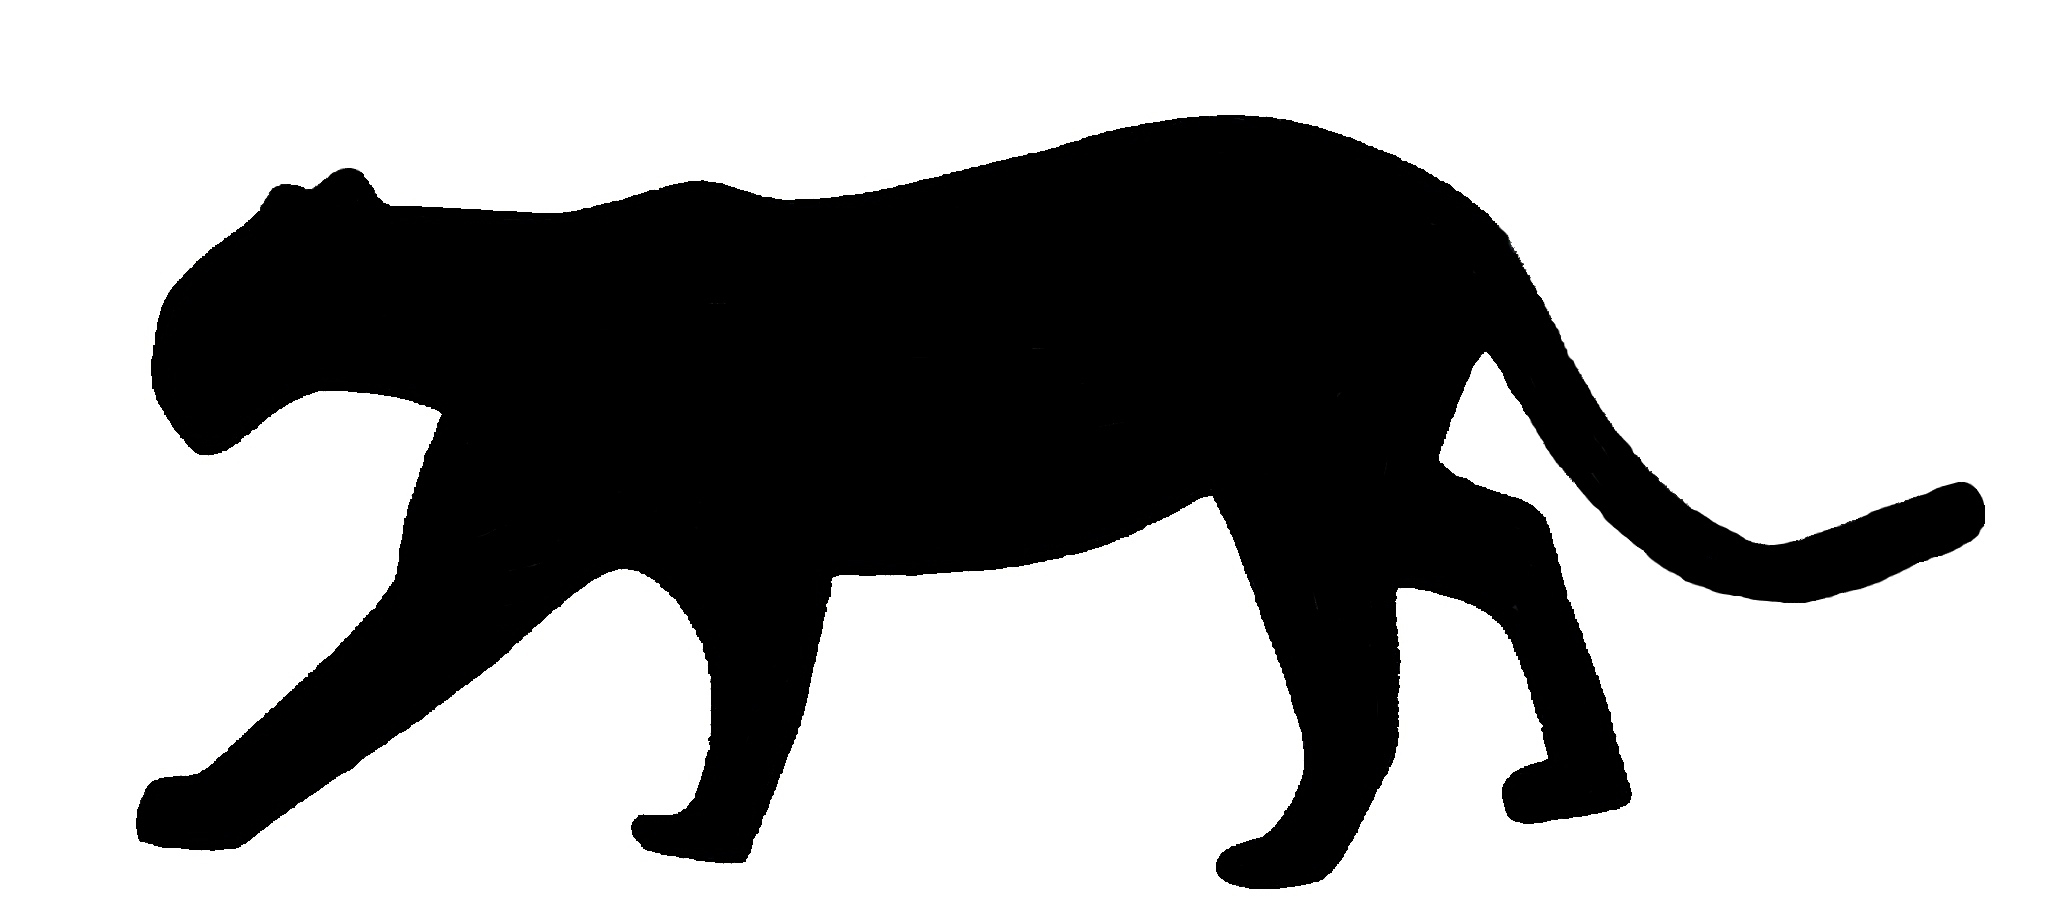 panther clipart free vector - photo #24